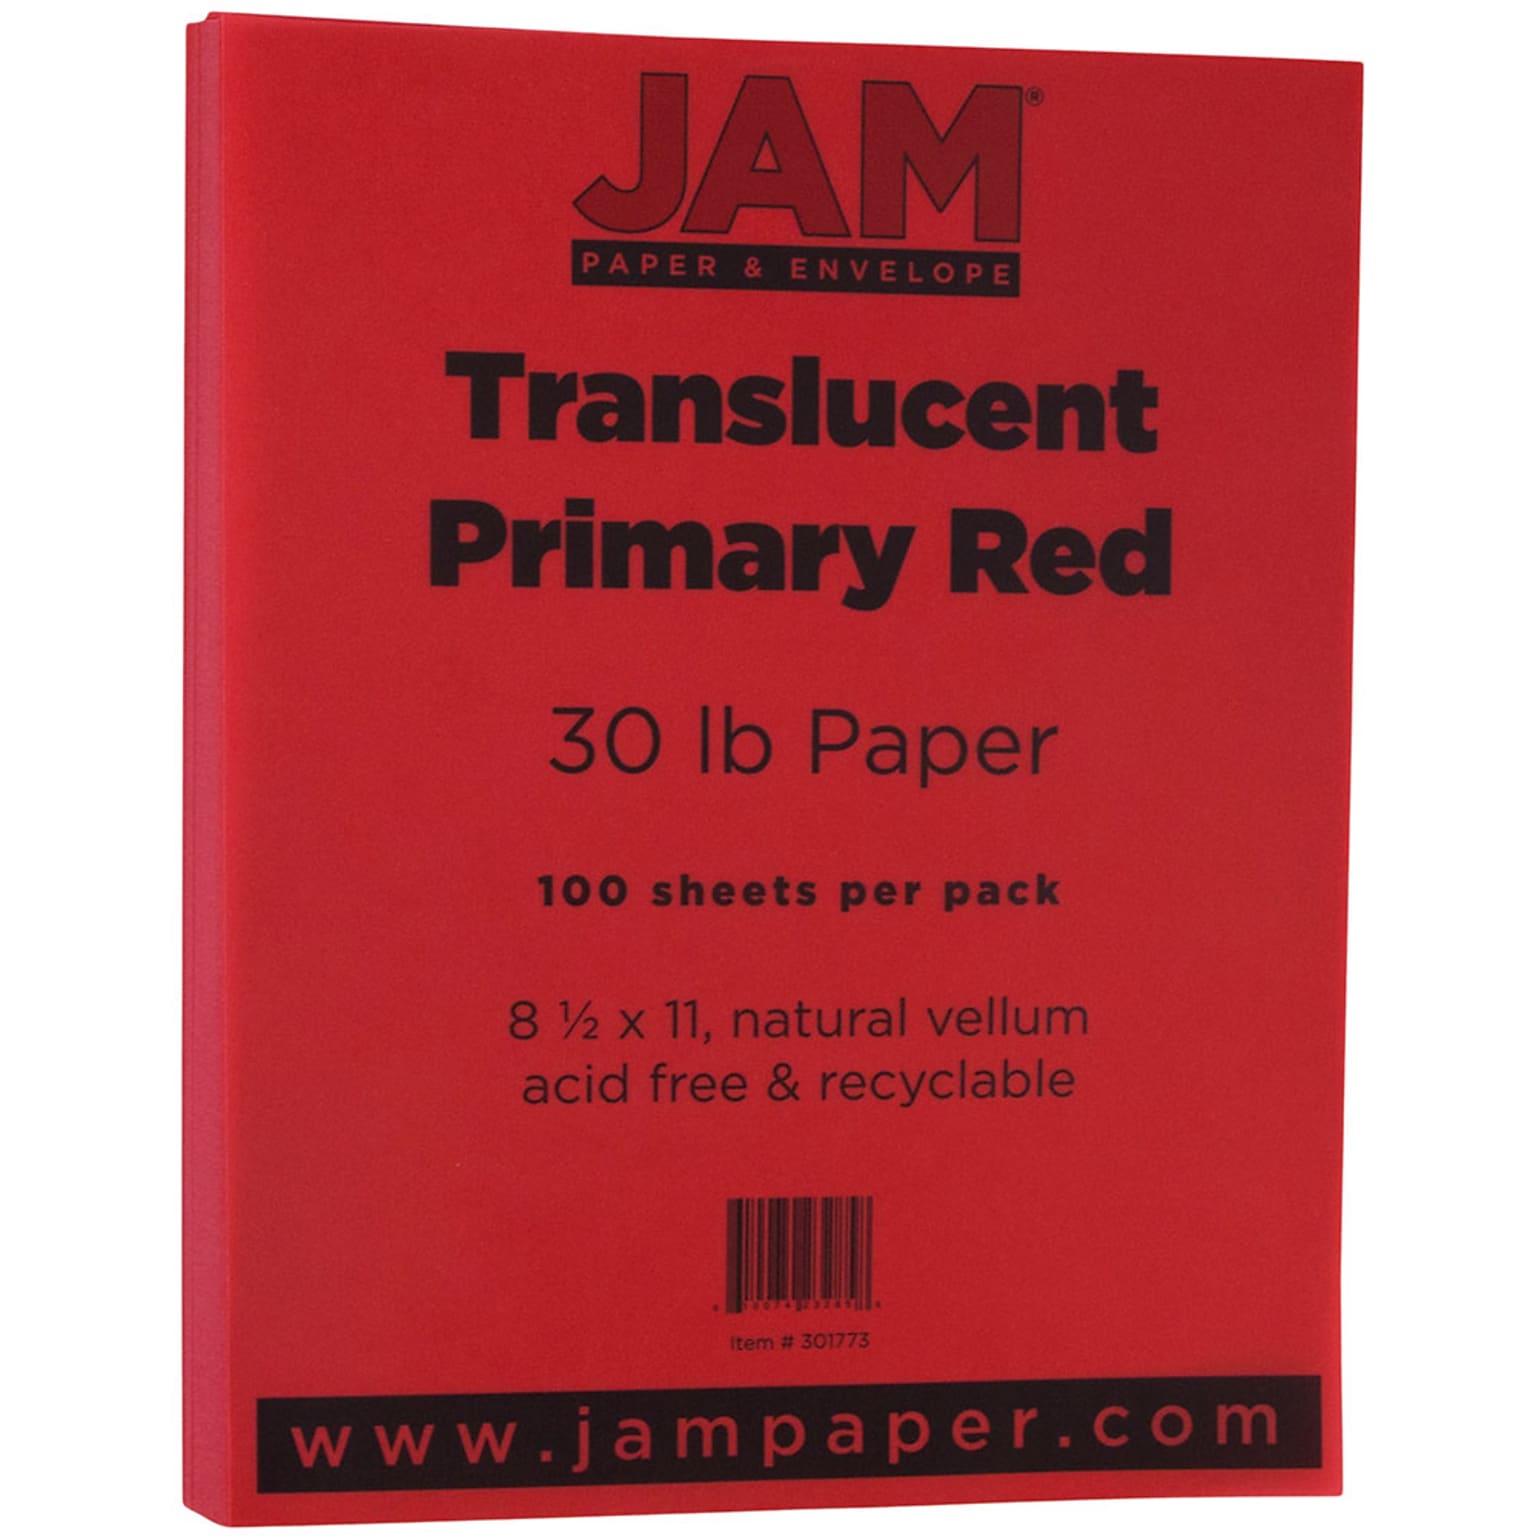 JAM Paper Translucent Vellum Colored Paper, 30 lbs., 8.5 x 11, Primary Red, 100 Sheets/Pack (301773)